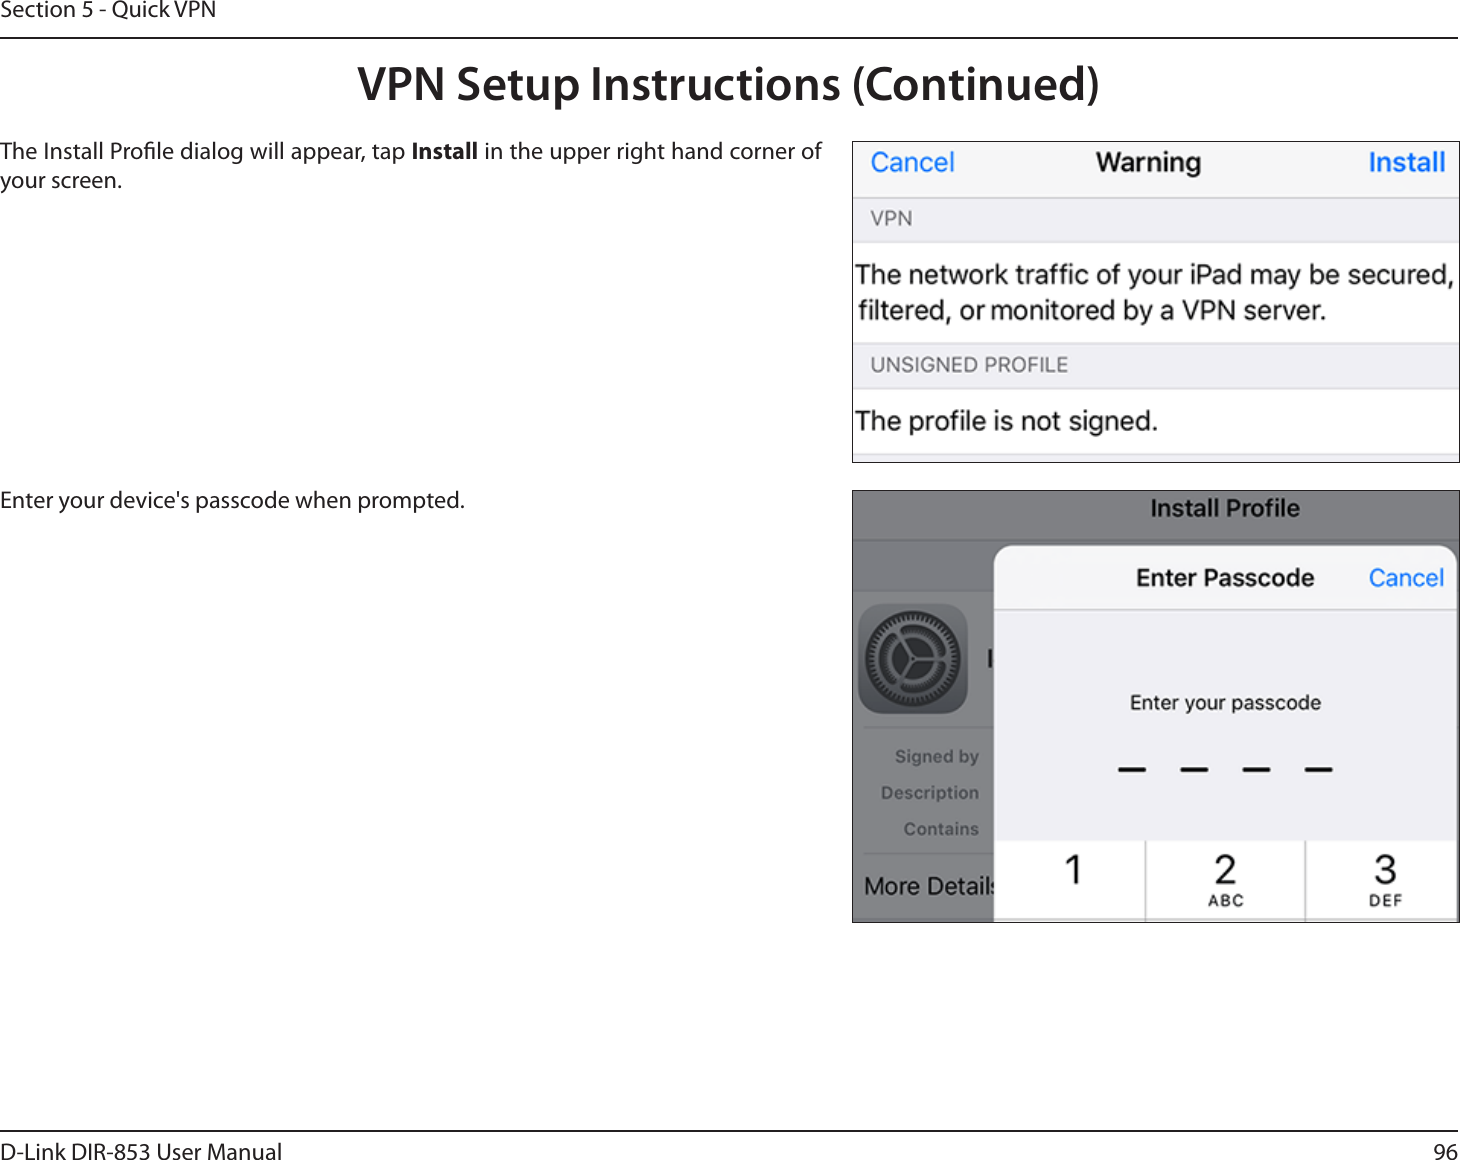 96D-Link DIR-853 User ManualSection 5 - Quick VPNThe Install Prole dialog will appear, tap Install in the upper right hand corner of your screen.Enter your device&apos;s passcode when prompted. VPN Setup Instructions (Continued)